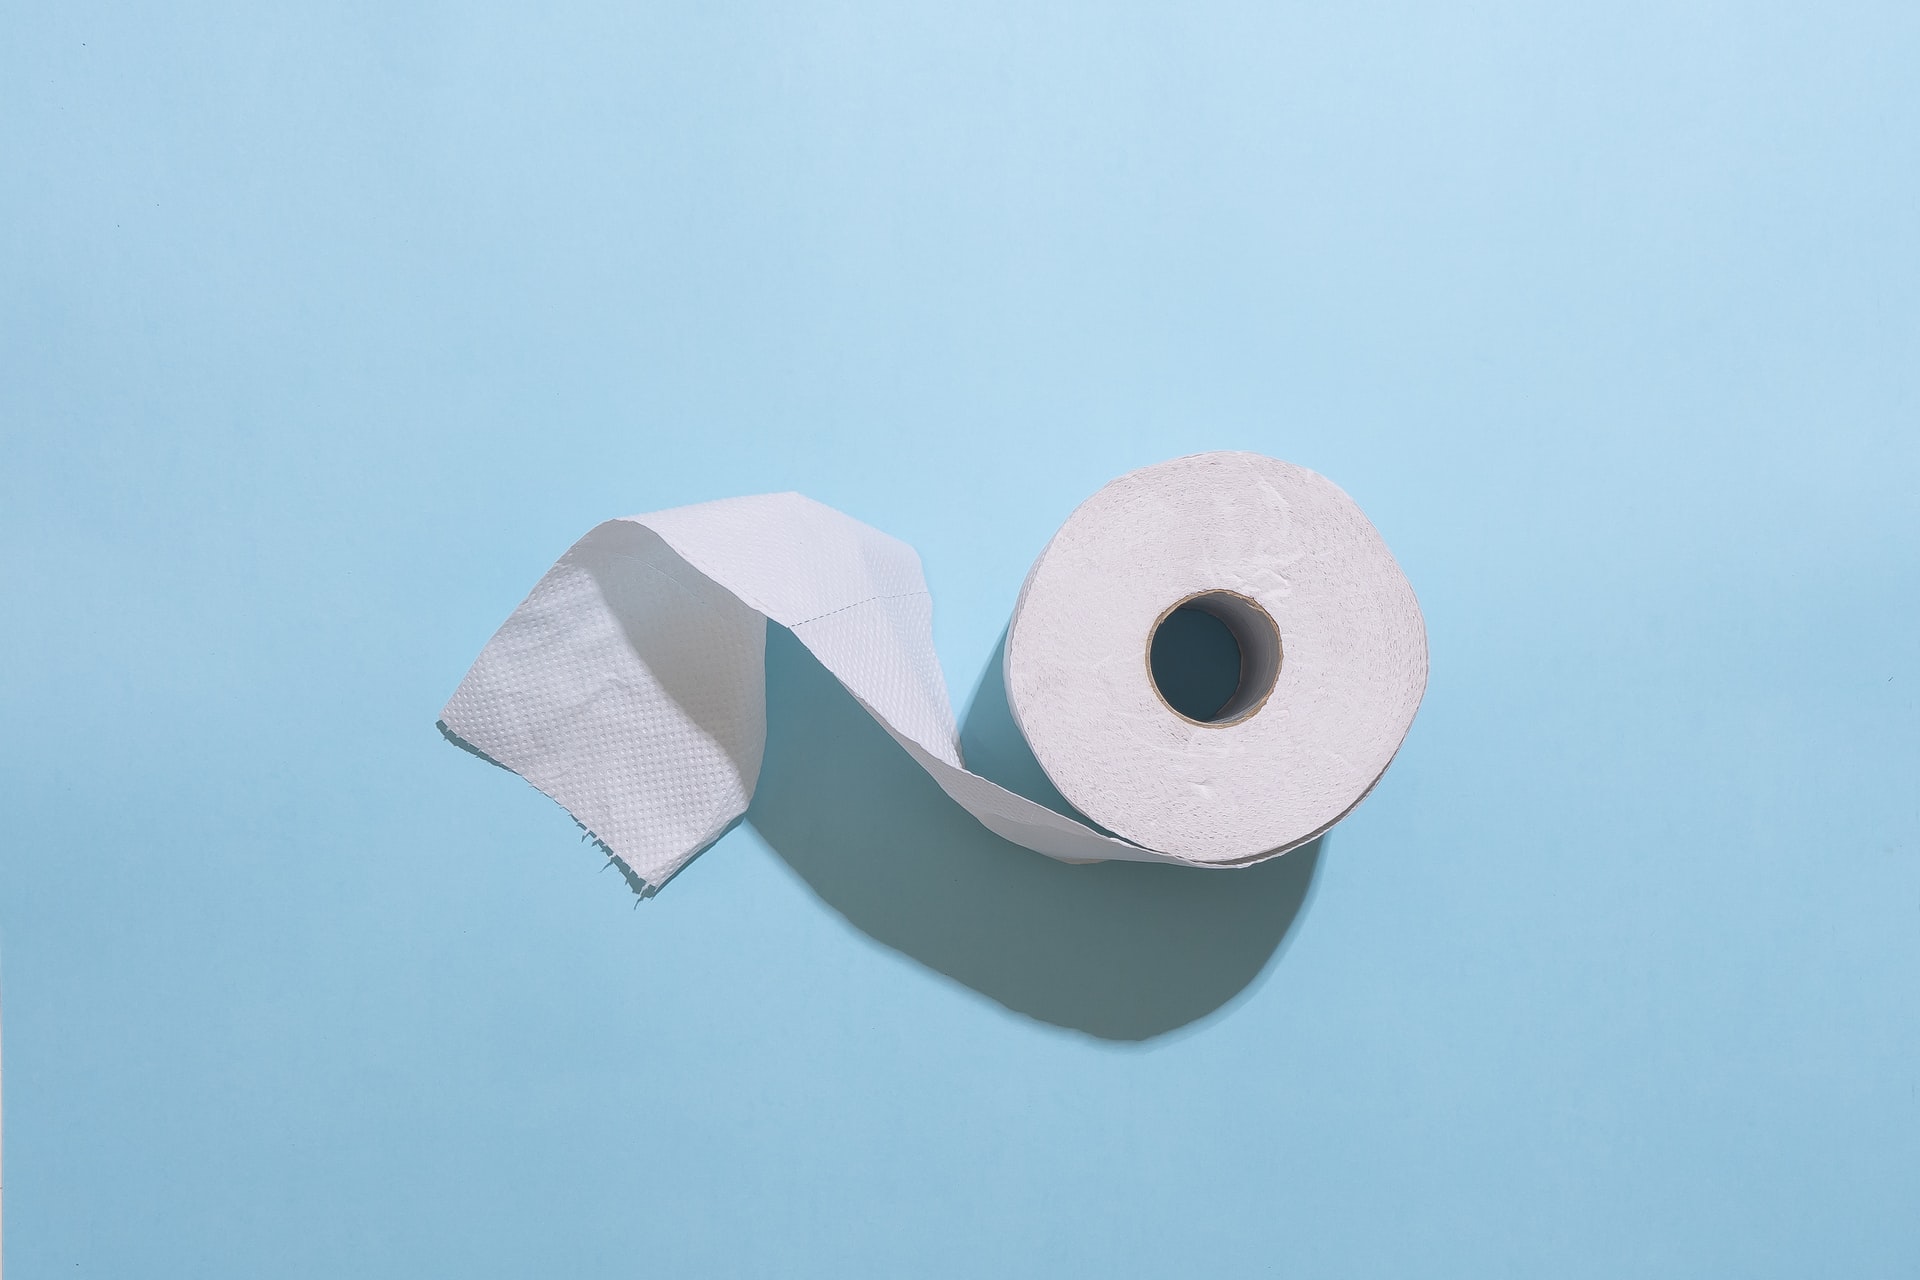 What Is the Circumference of the Inside of a Toilet Paper Roll?